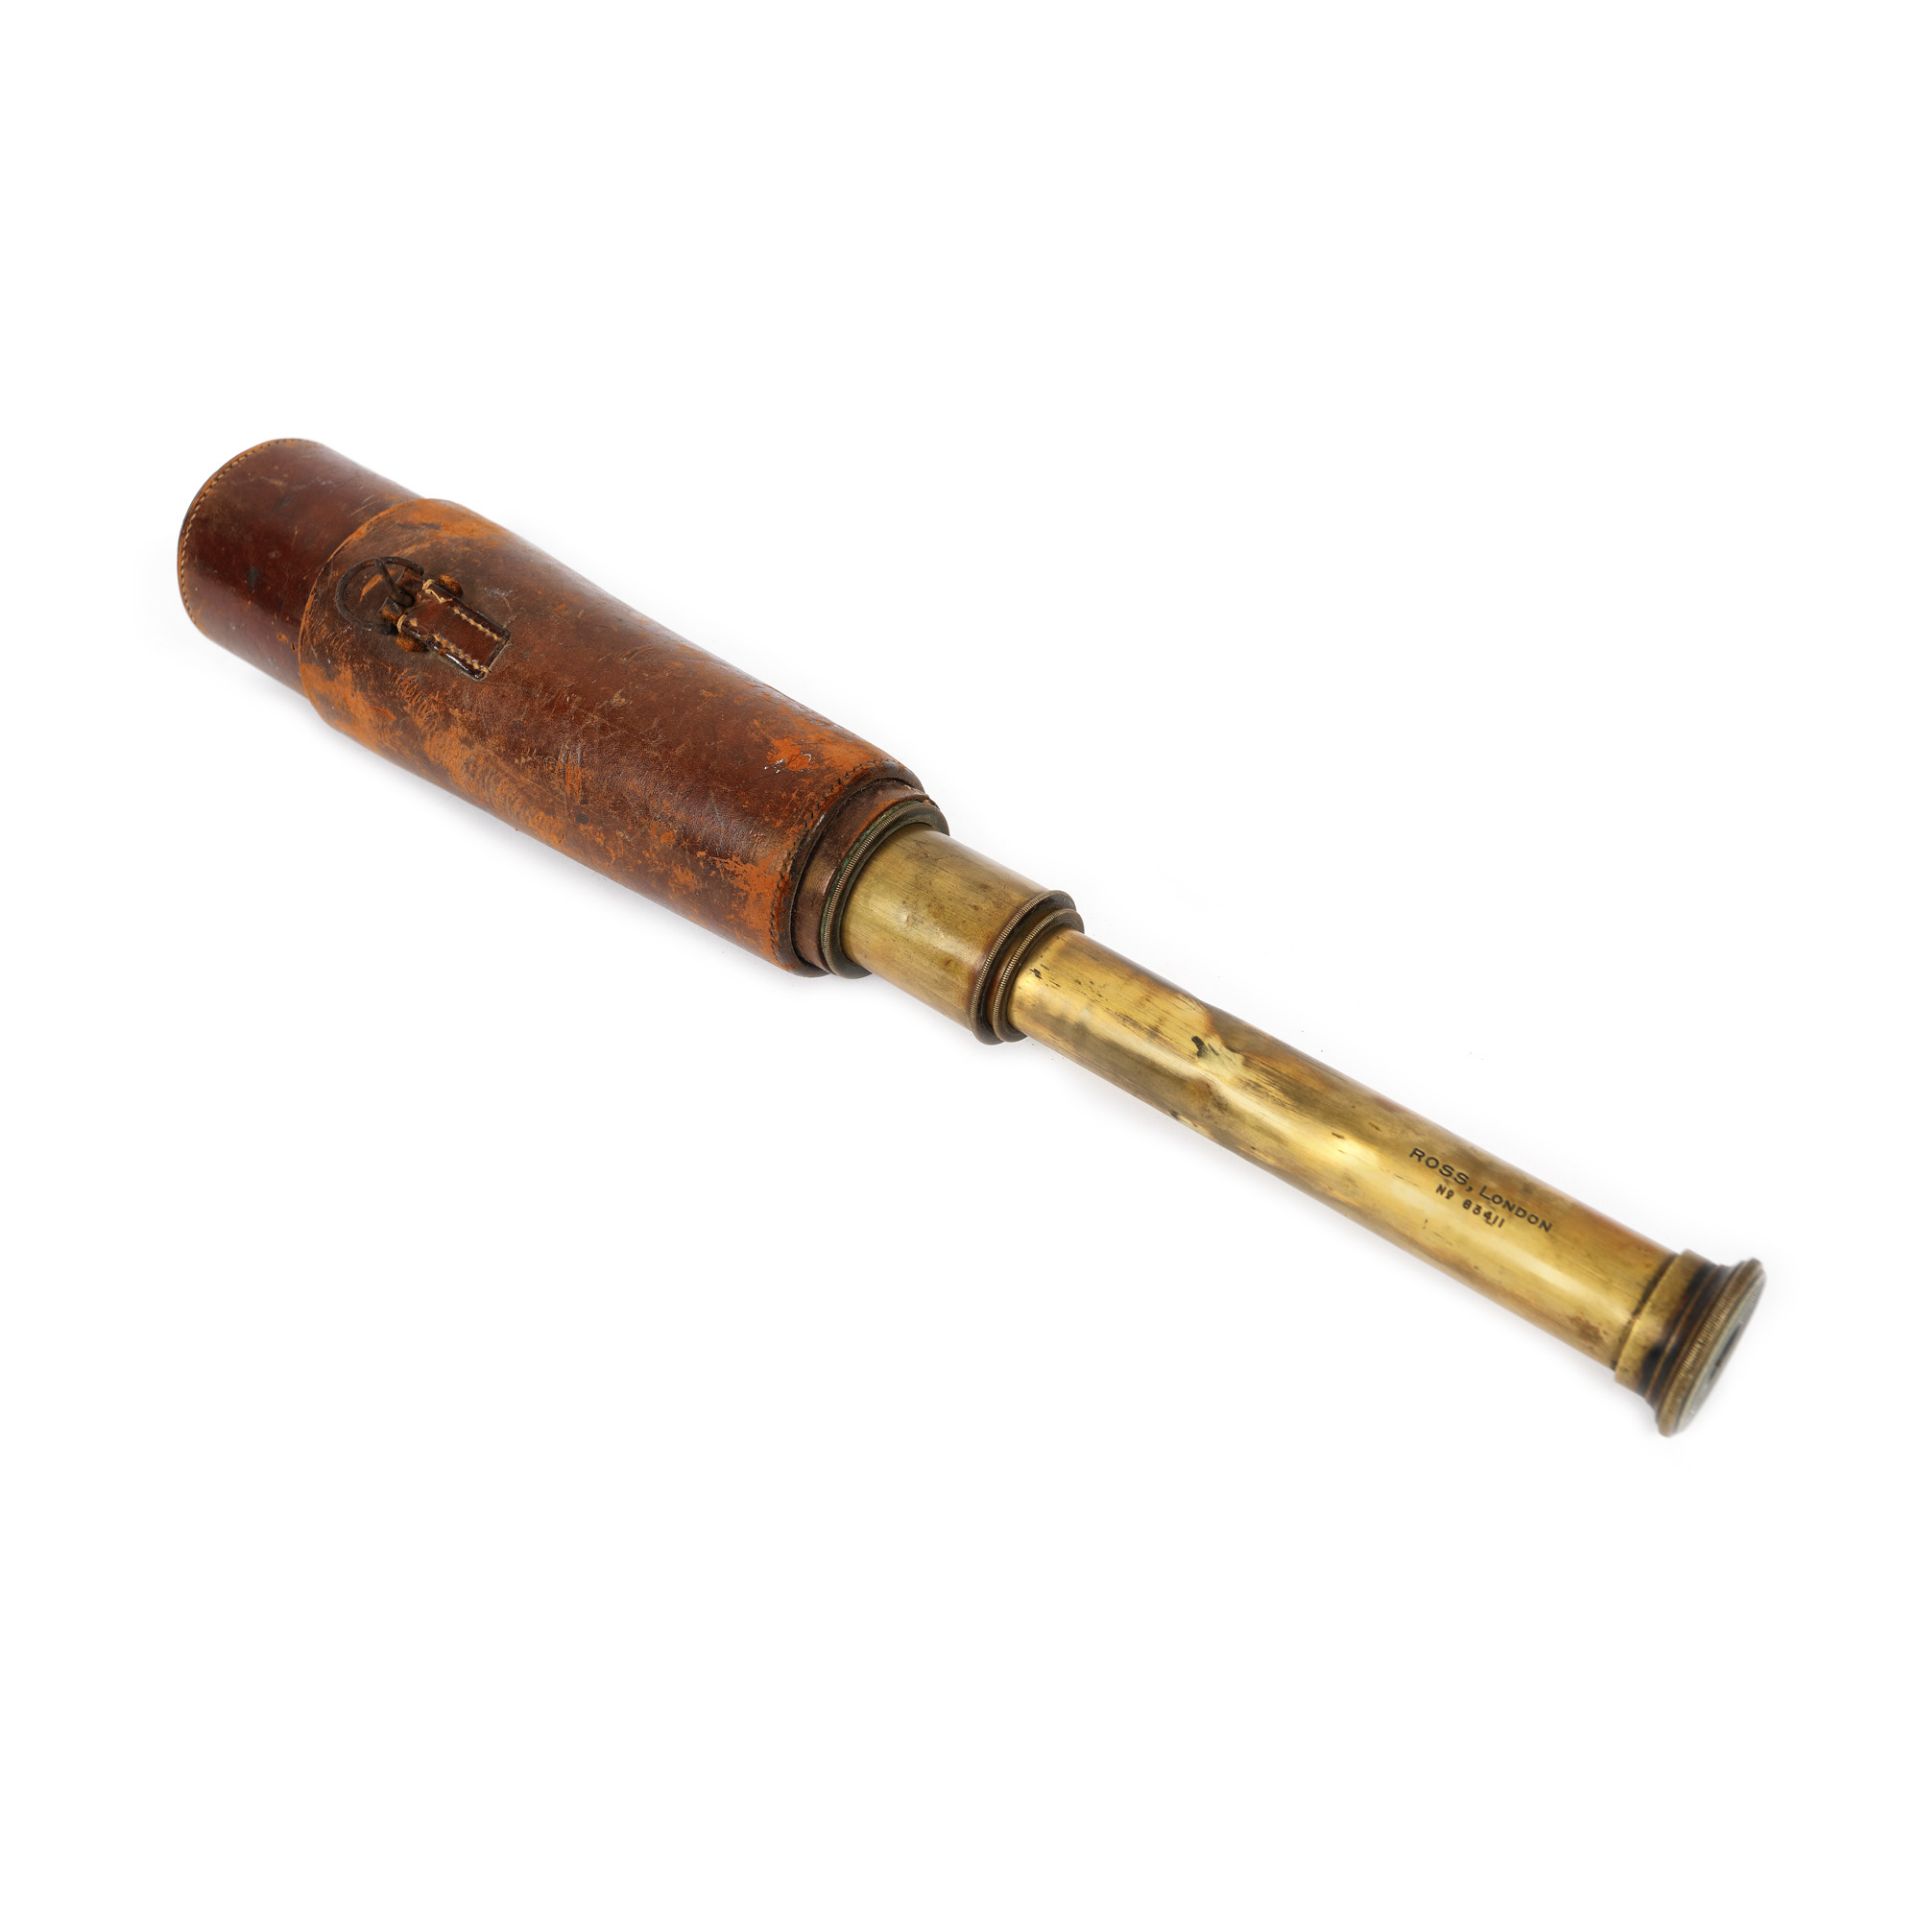 Maritime telescope with leather sheath, "Ross of London" brand, Great Britain, approx. 1880 - Bild 2 aus 3